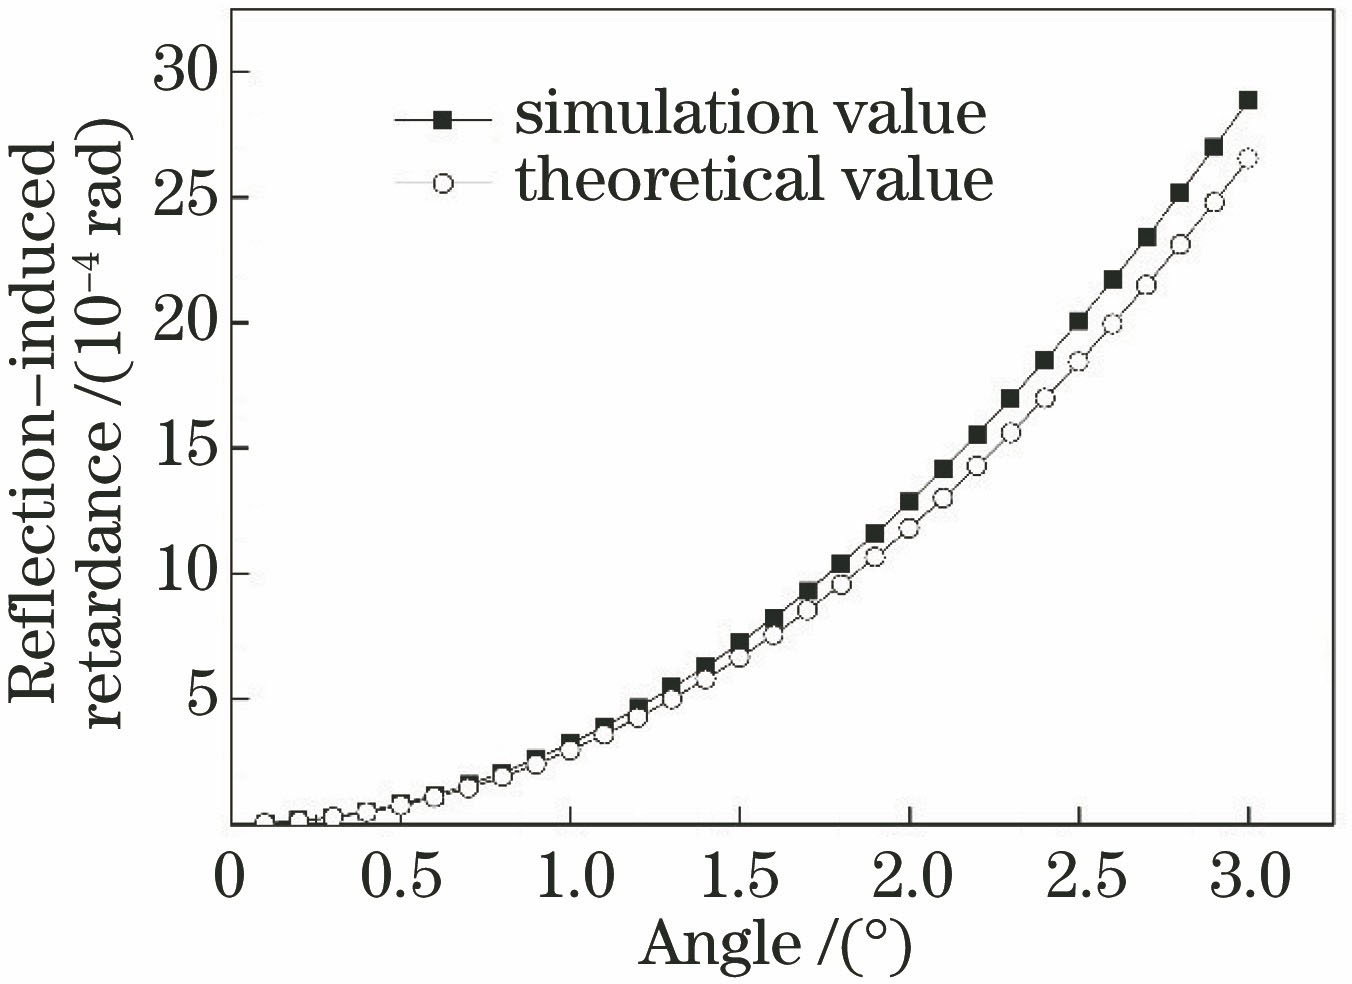 Comparison of theoretical and simulation values